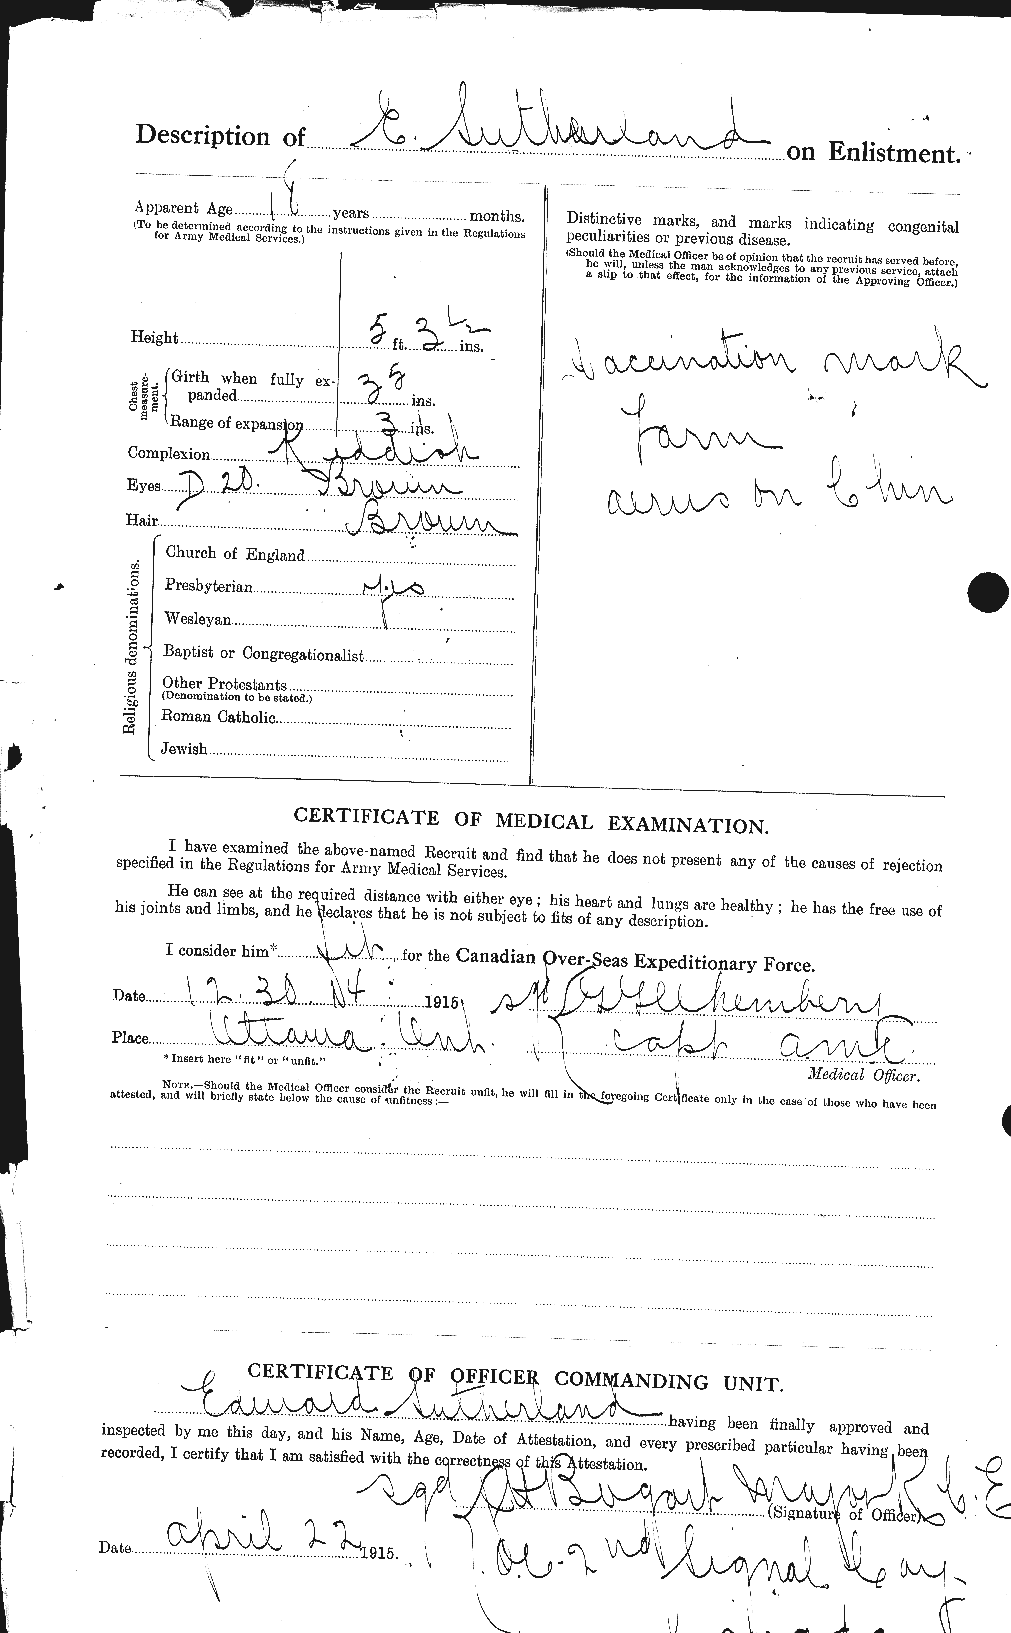 Personnel Records of the First World War - CEF 124902b